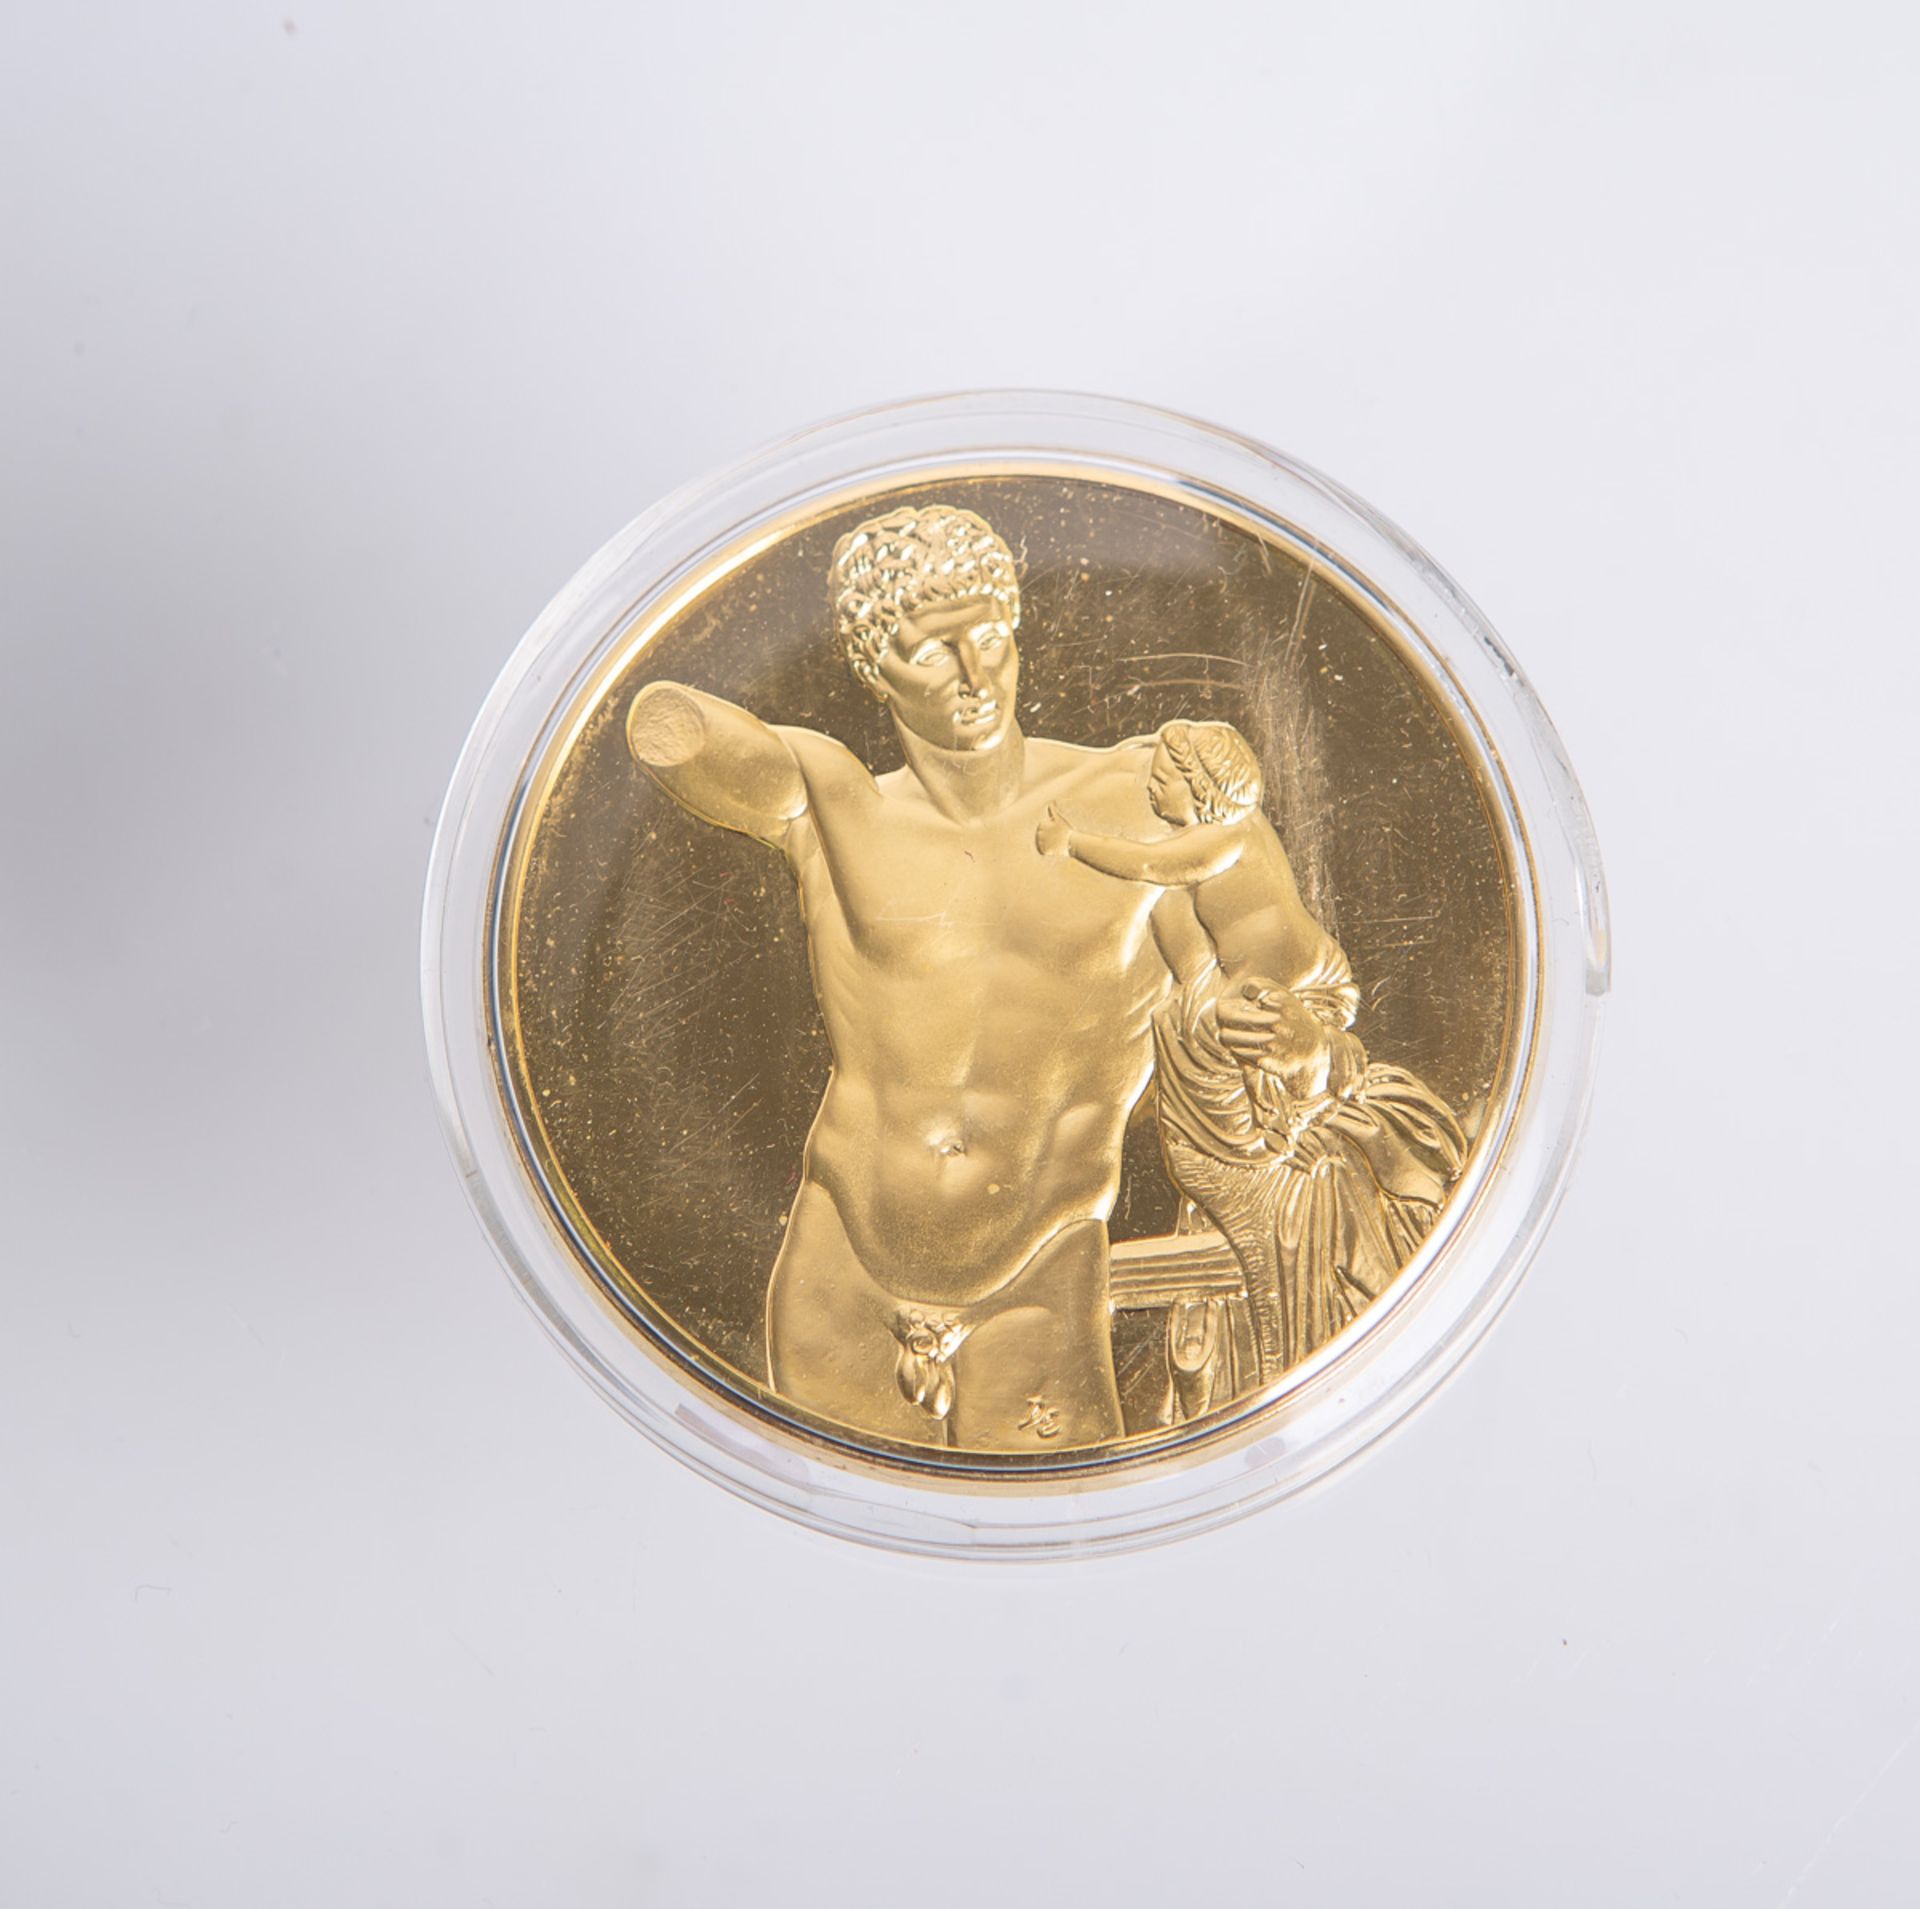 Medaille "Hermes with the infant Dionysos" (USA)